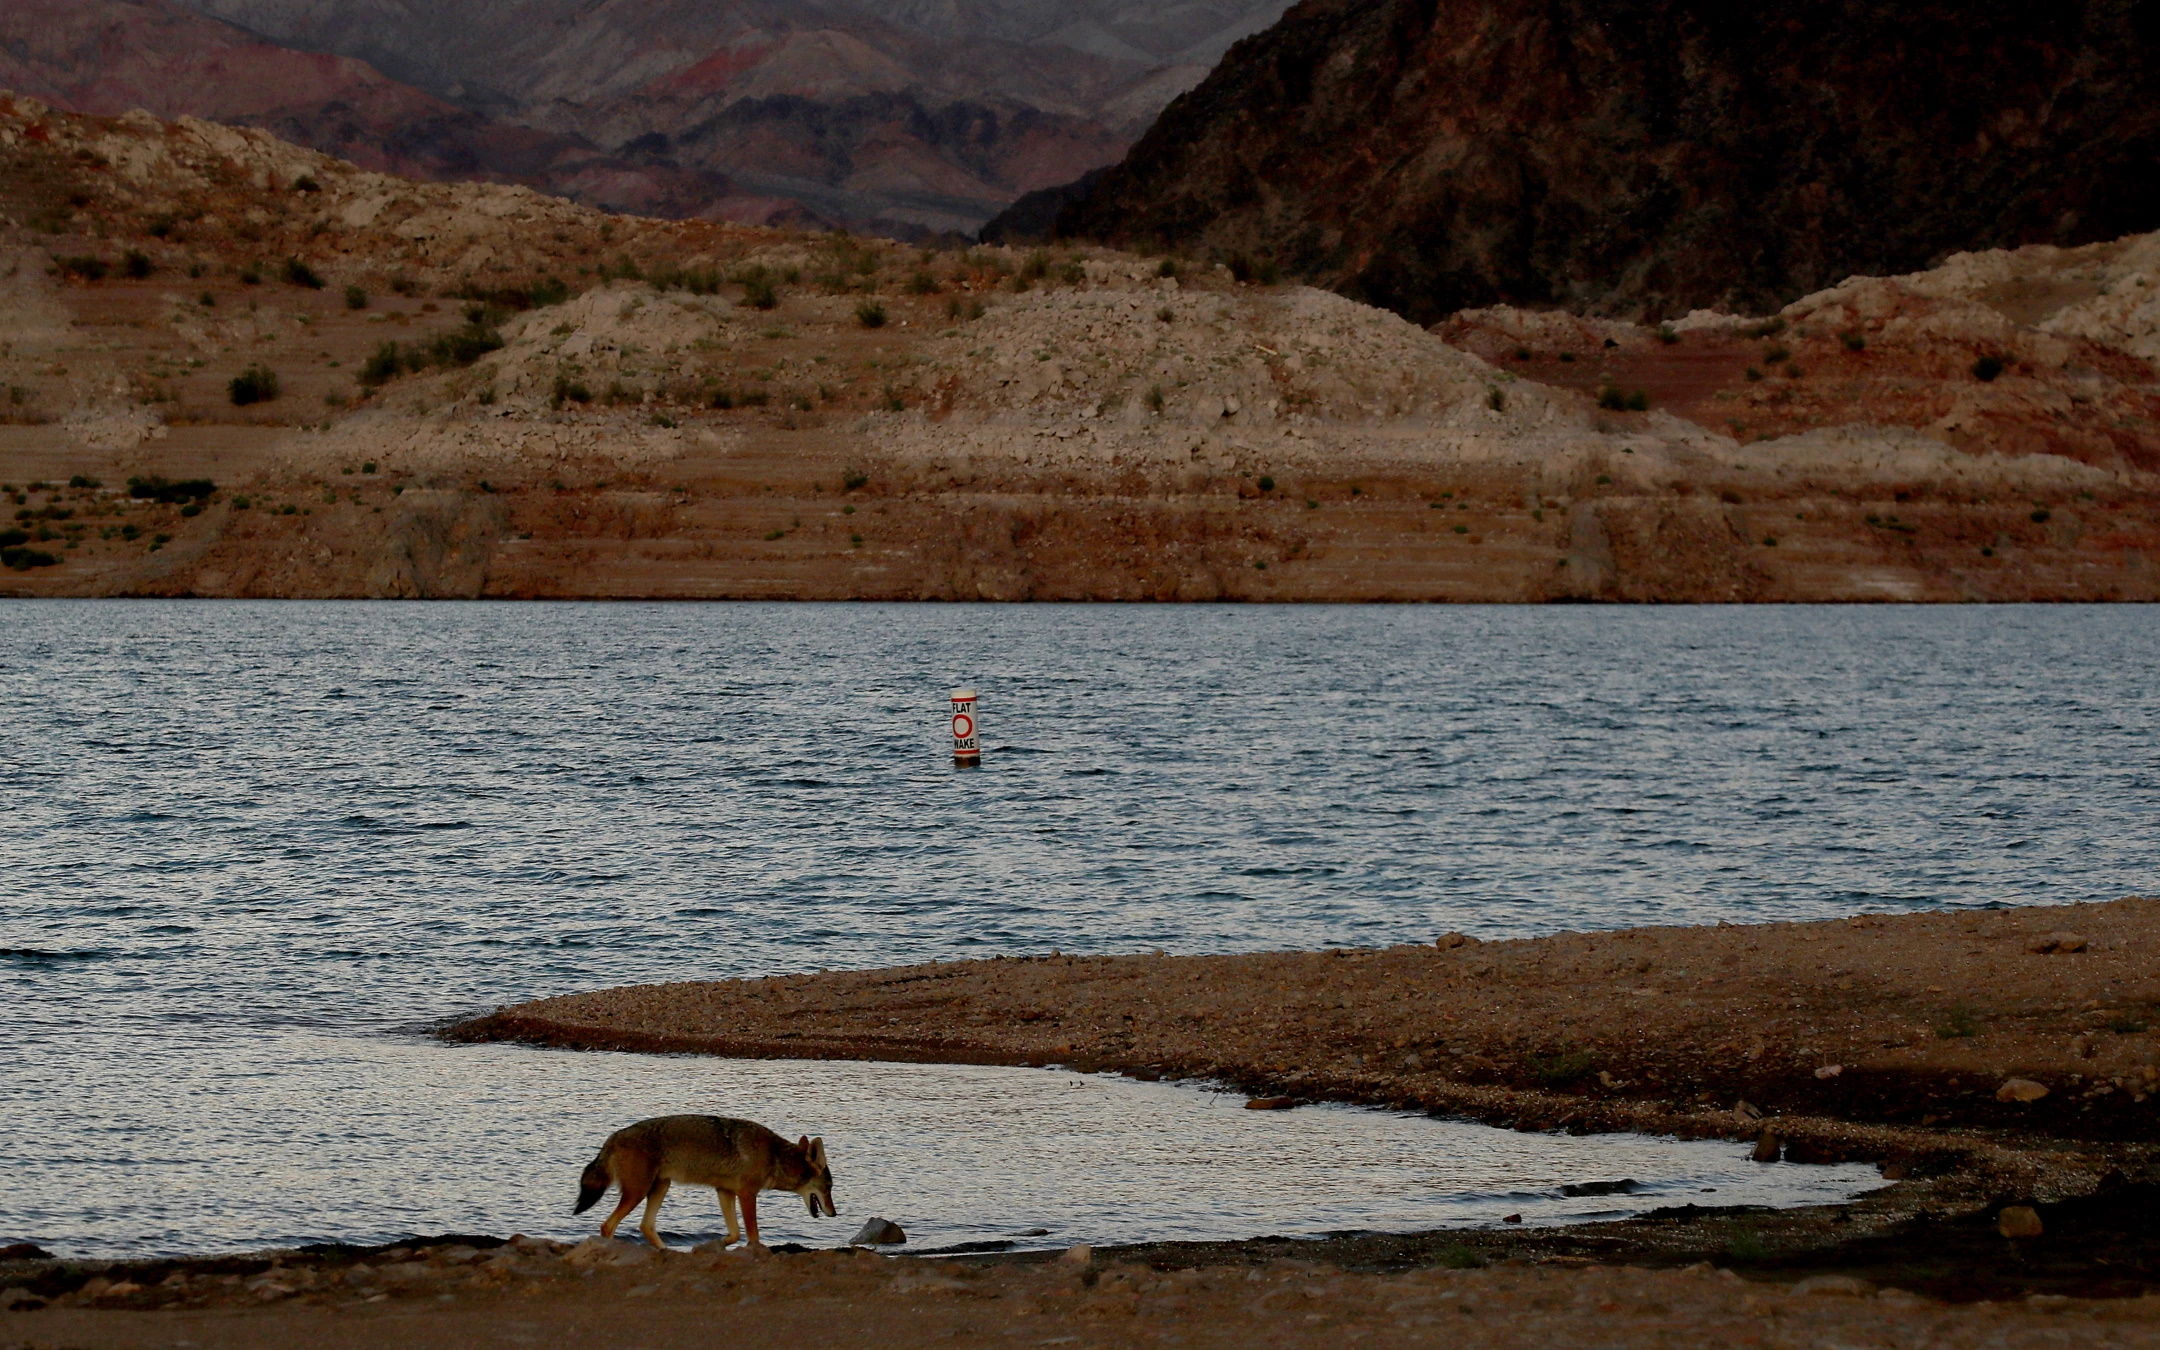 A coyote forages along the shore of steadily receding Lake Mead, the nation’s largest reservoir. Photo: Luis Sinco / Los Angeles Times